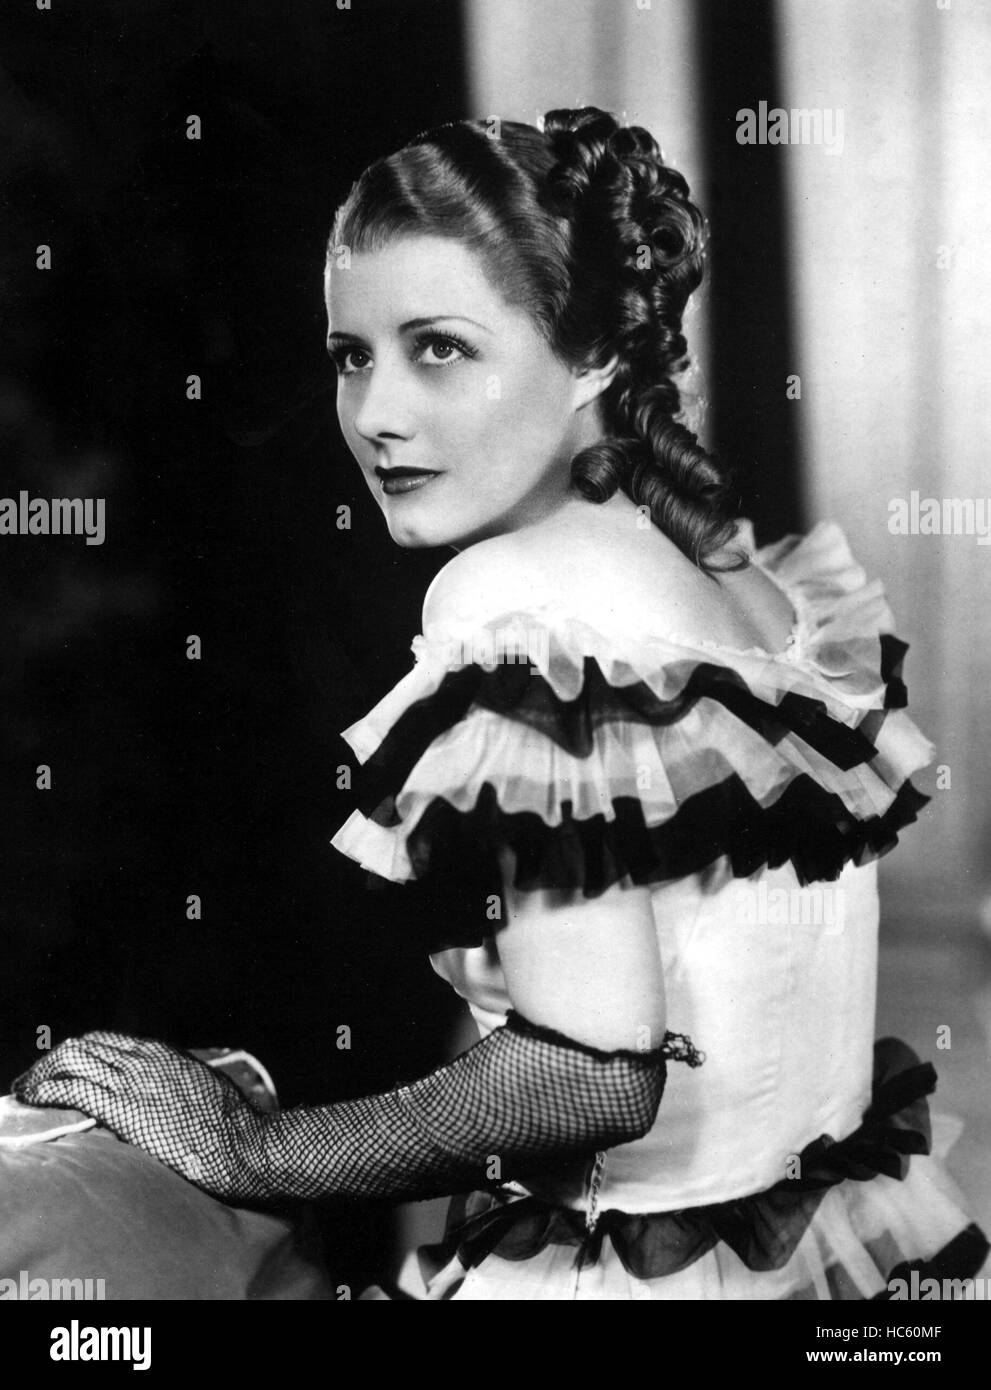 THE SECRET OF MADAME BLANCHE, Irene Dunne, 1933 Stock Photo - Alamy